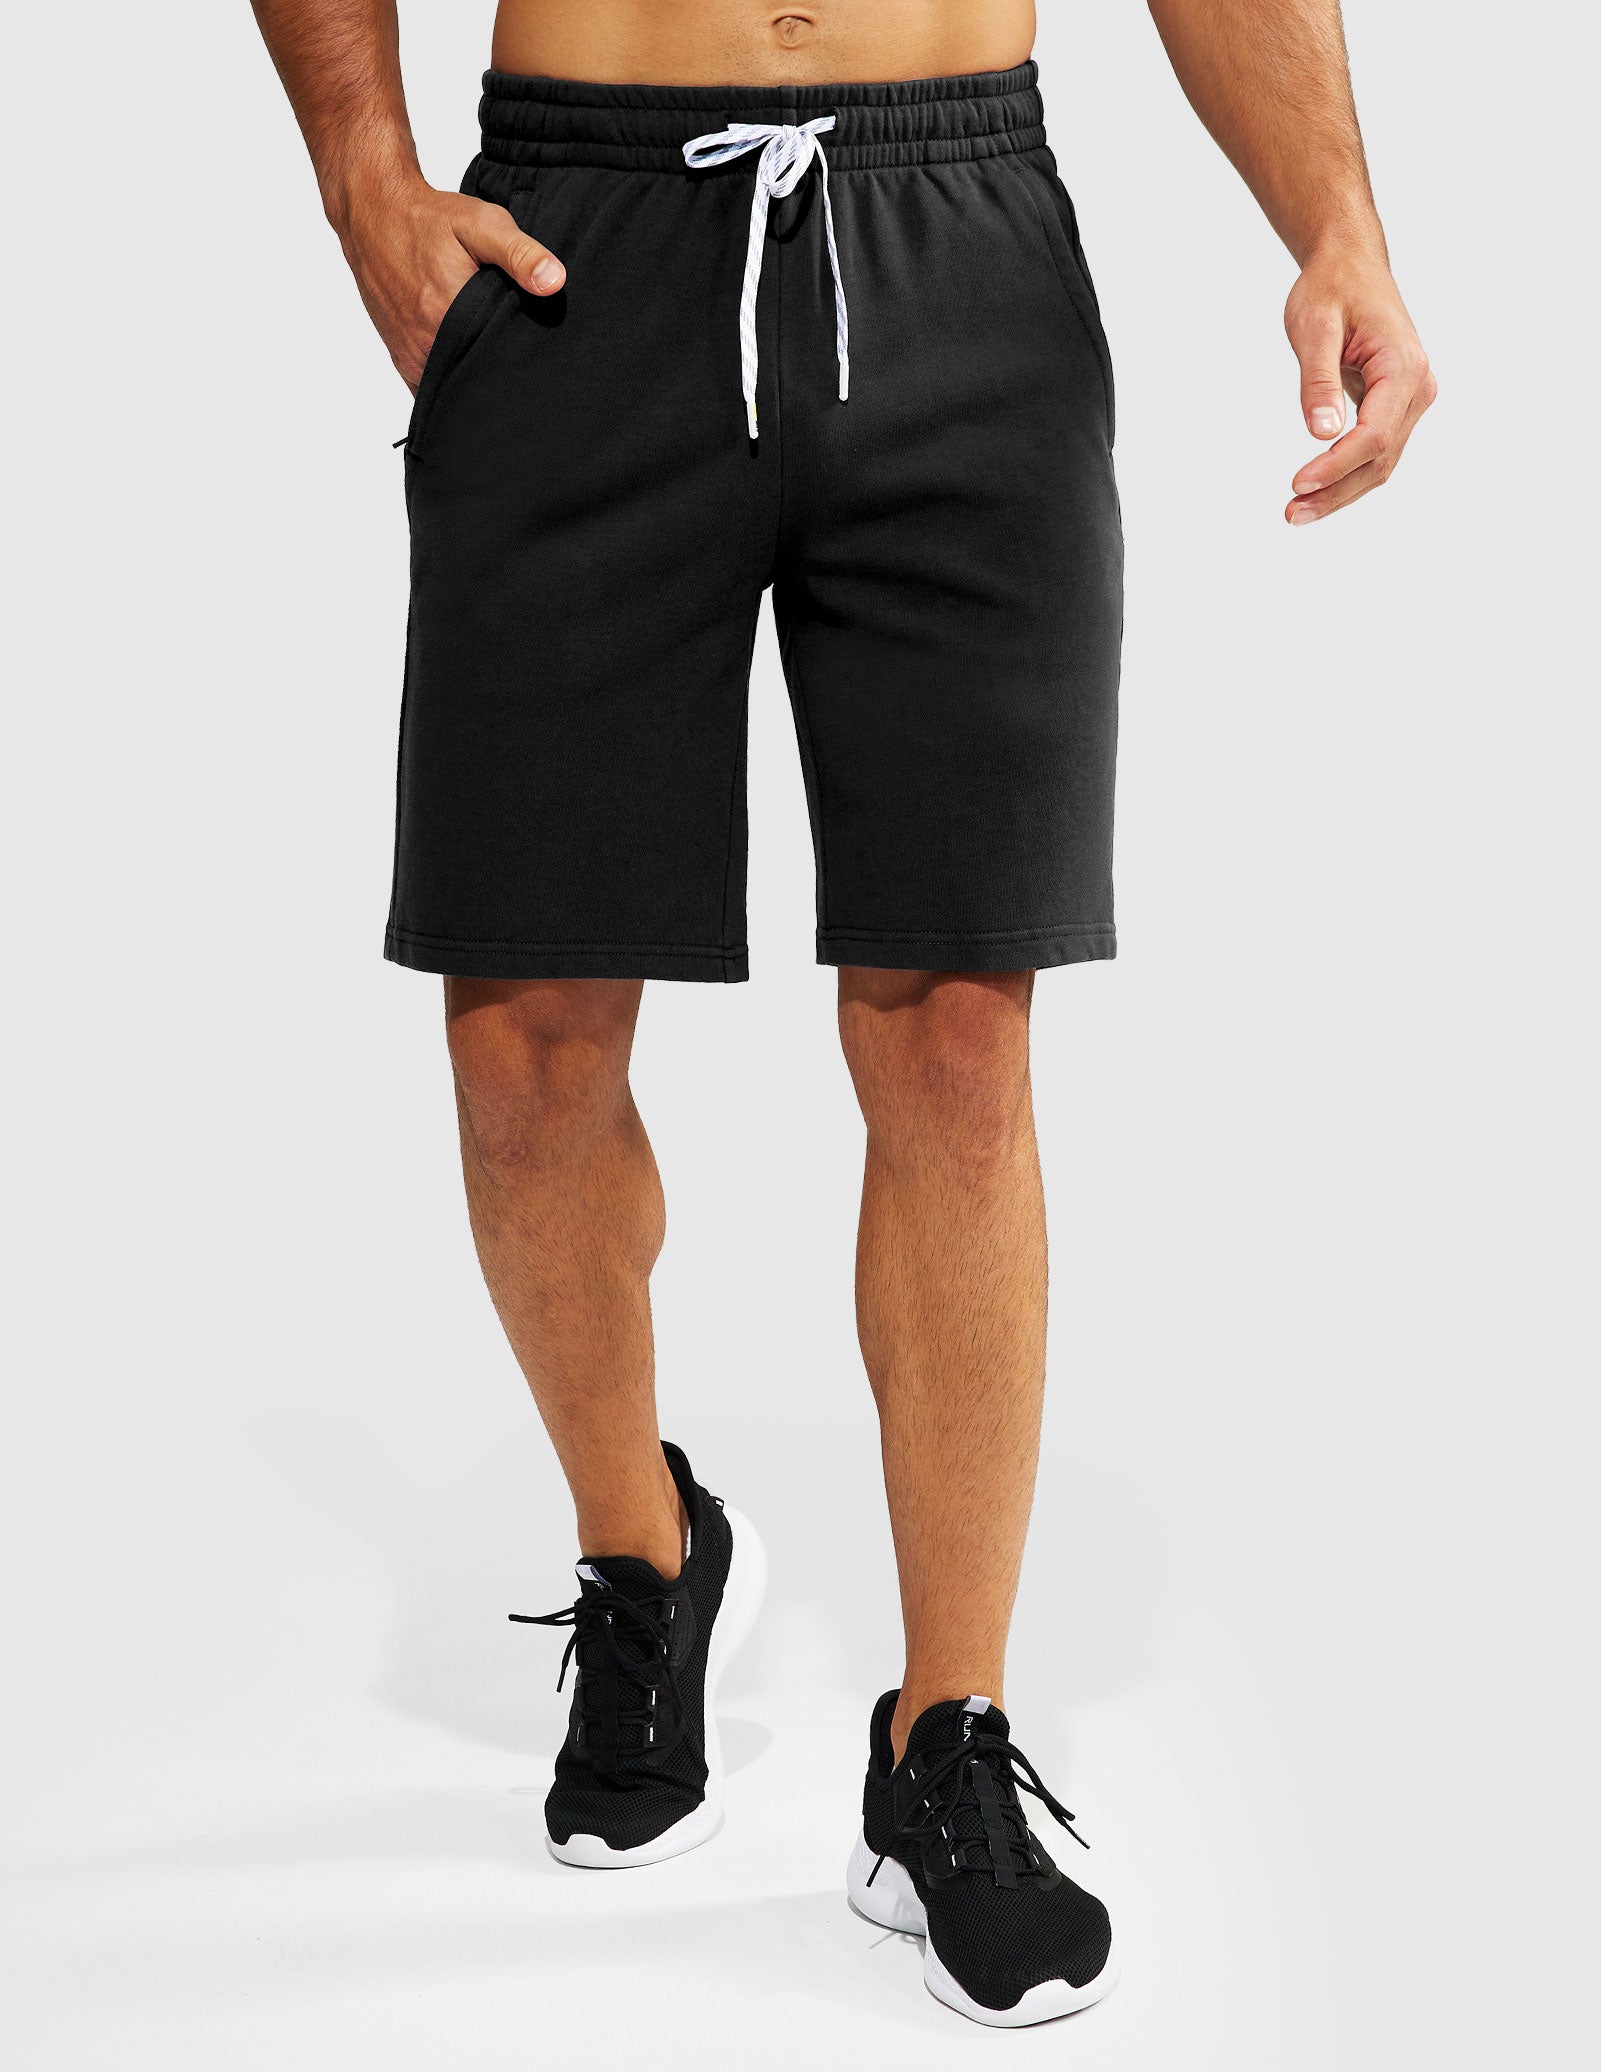 Men's 9-Inch Athletic Cotton Shorts with Pockets - Black / S